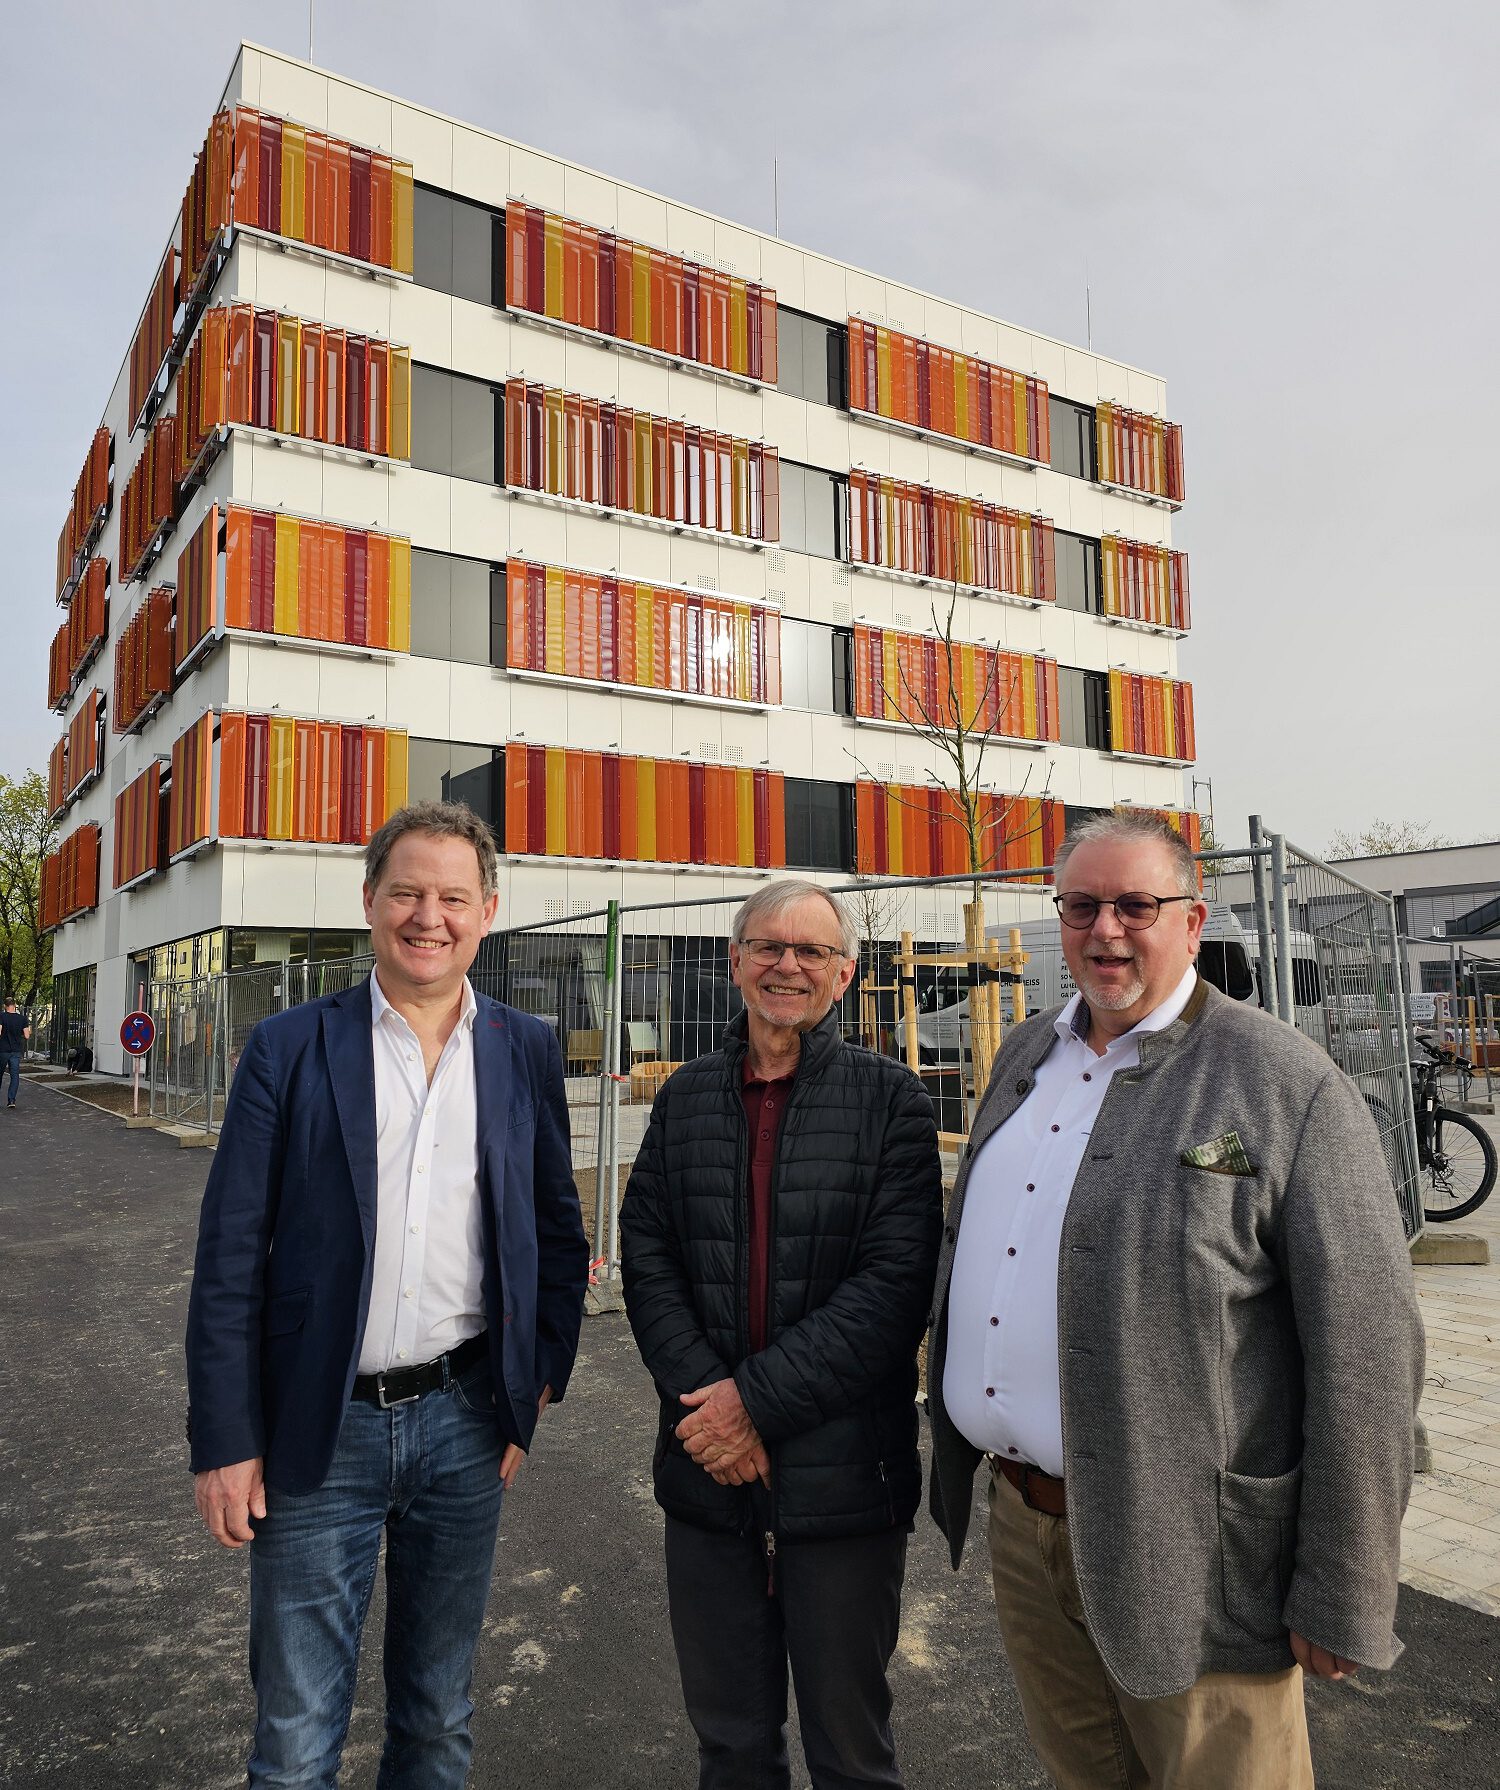 First mayor Florian Schneider, city councilor and school officer Norbert English and project manager and office manager Werner Lechner in front of the almost finished extension of the Hans Kammerer School © Stadt Burghausen/ebh